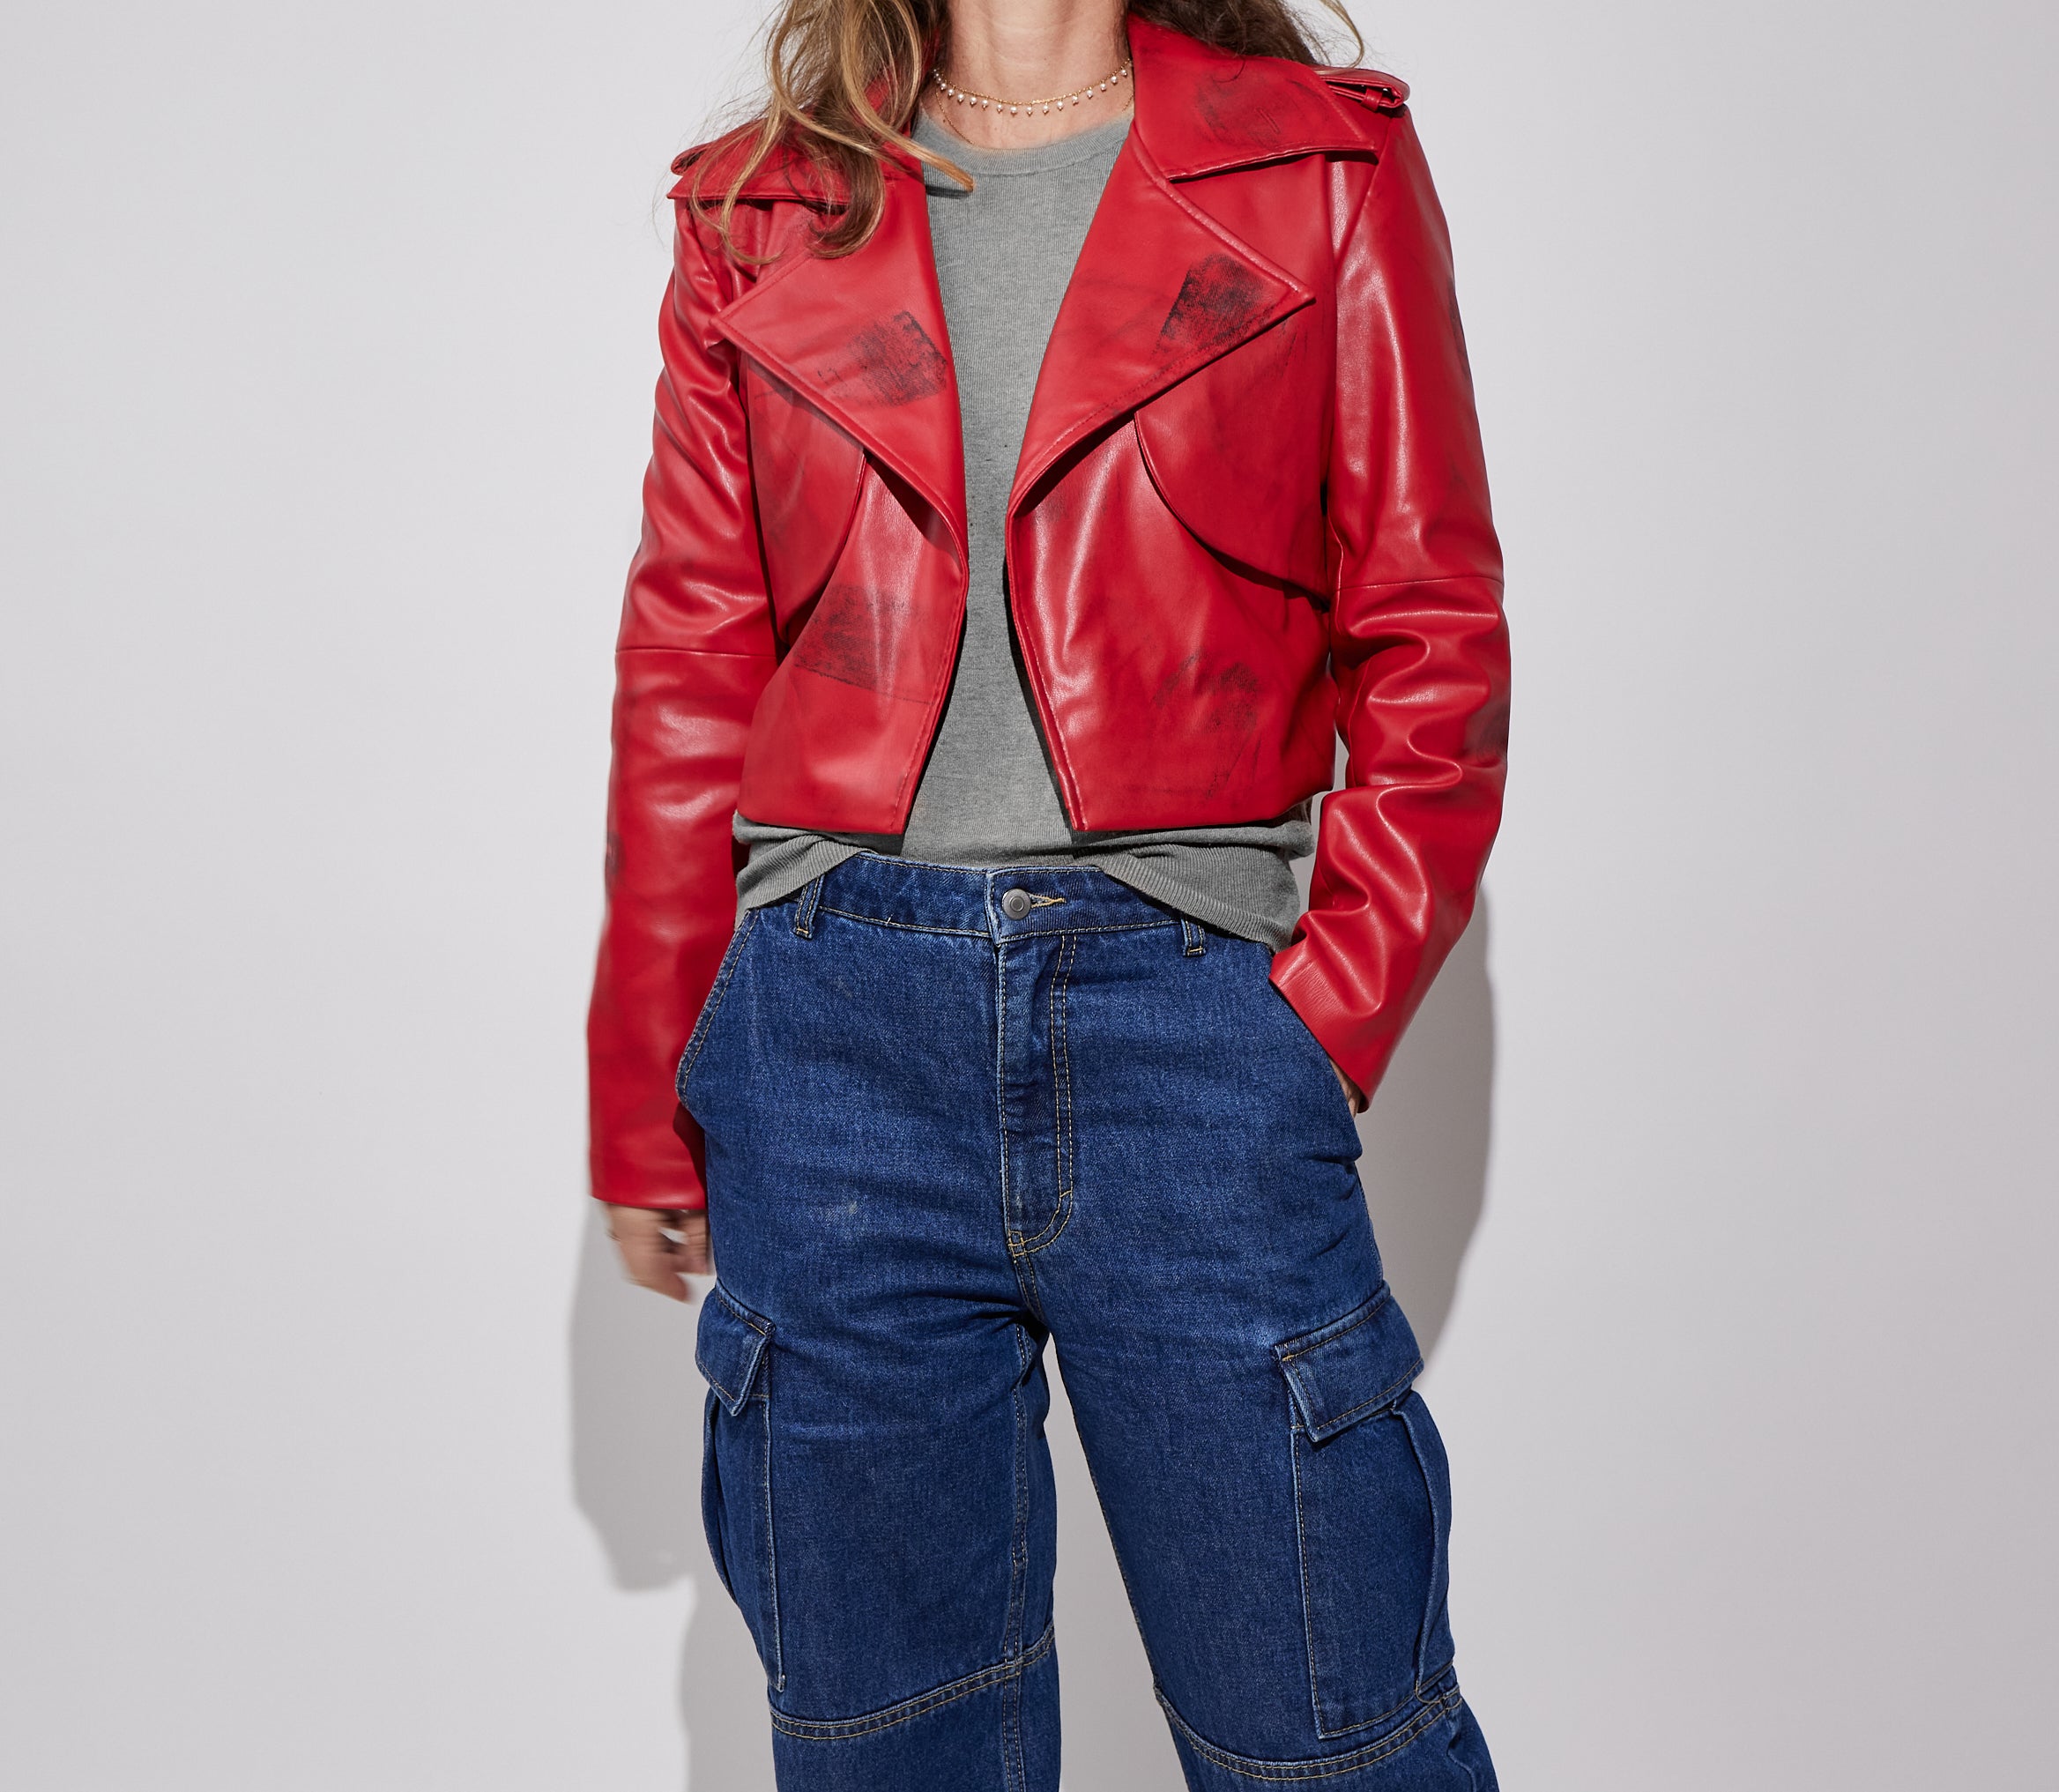 Short Red Leather Jacket